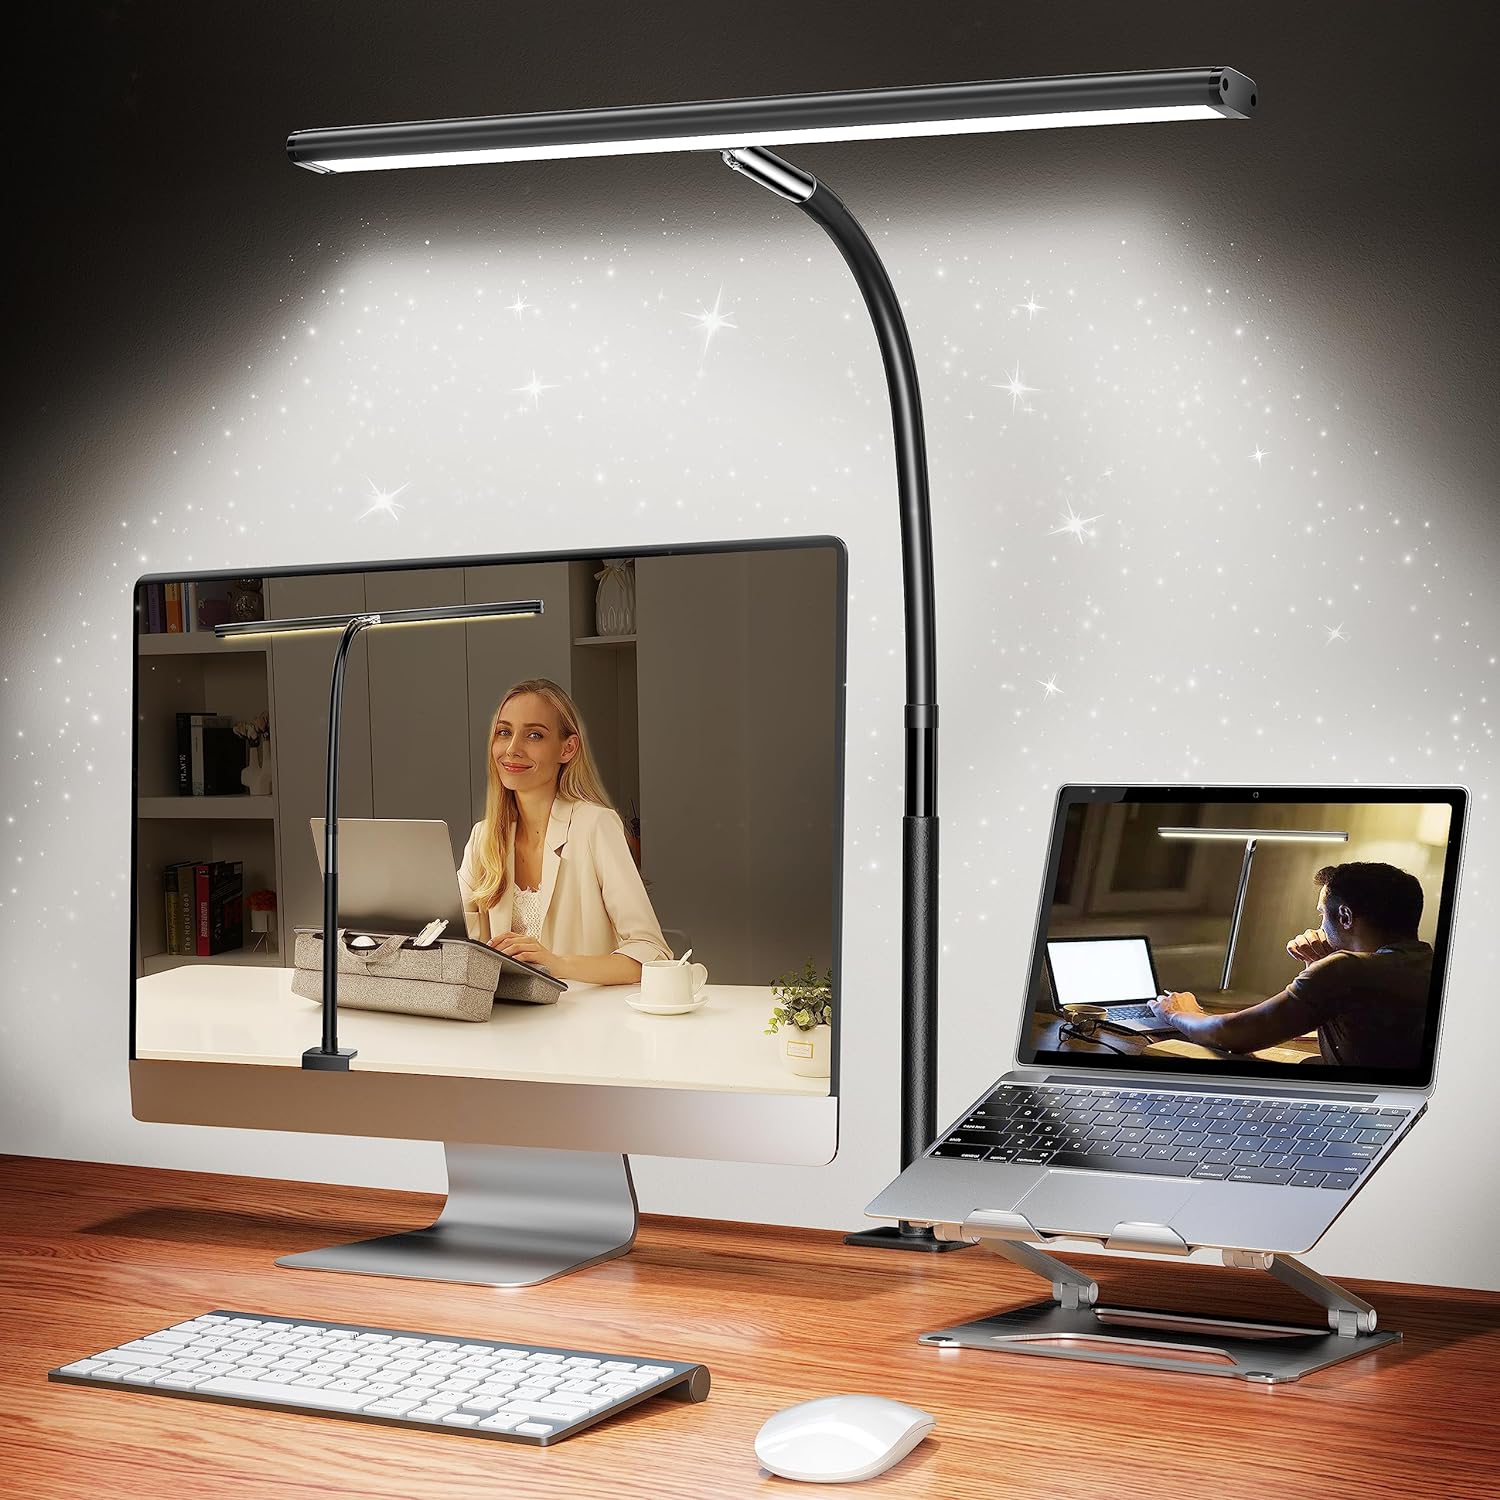 Unlock Savings on Airlonv LED Desk Lamp - Limited-Time Specials!